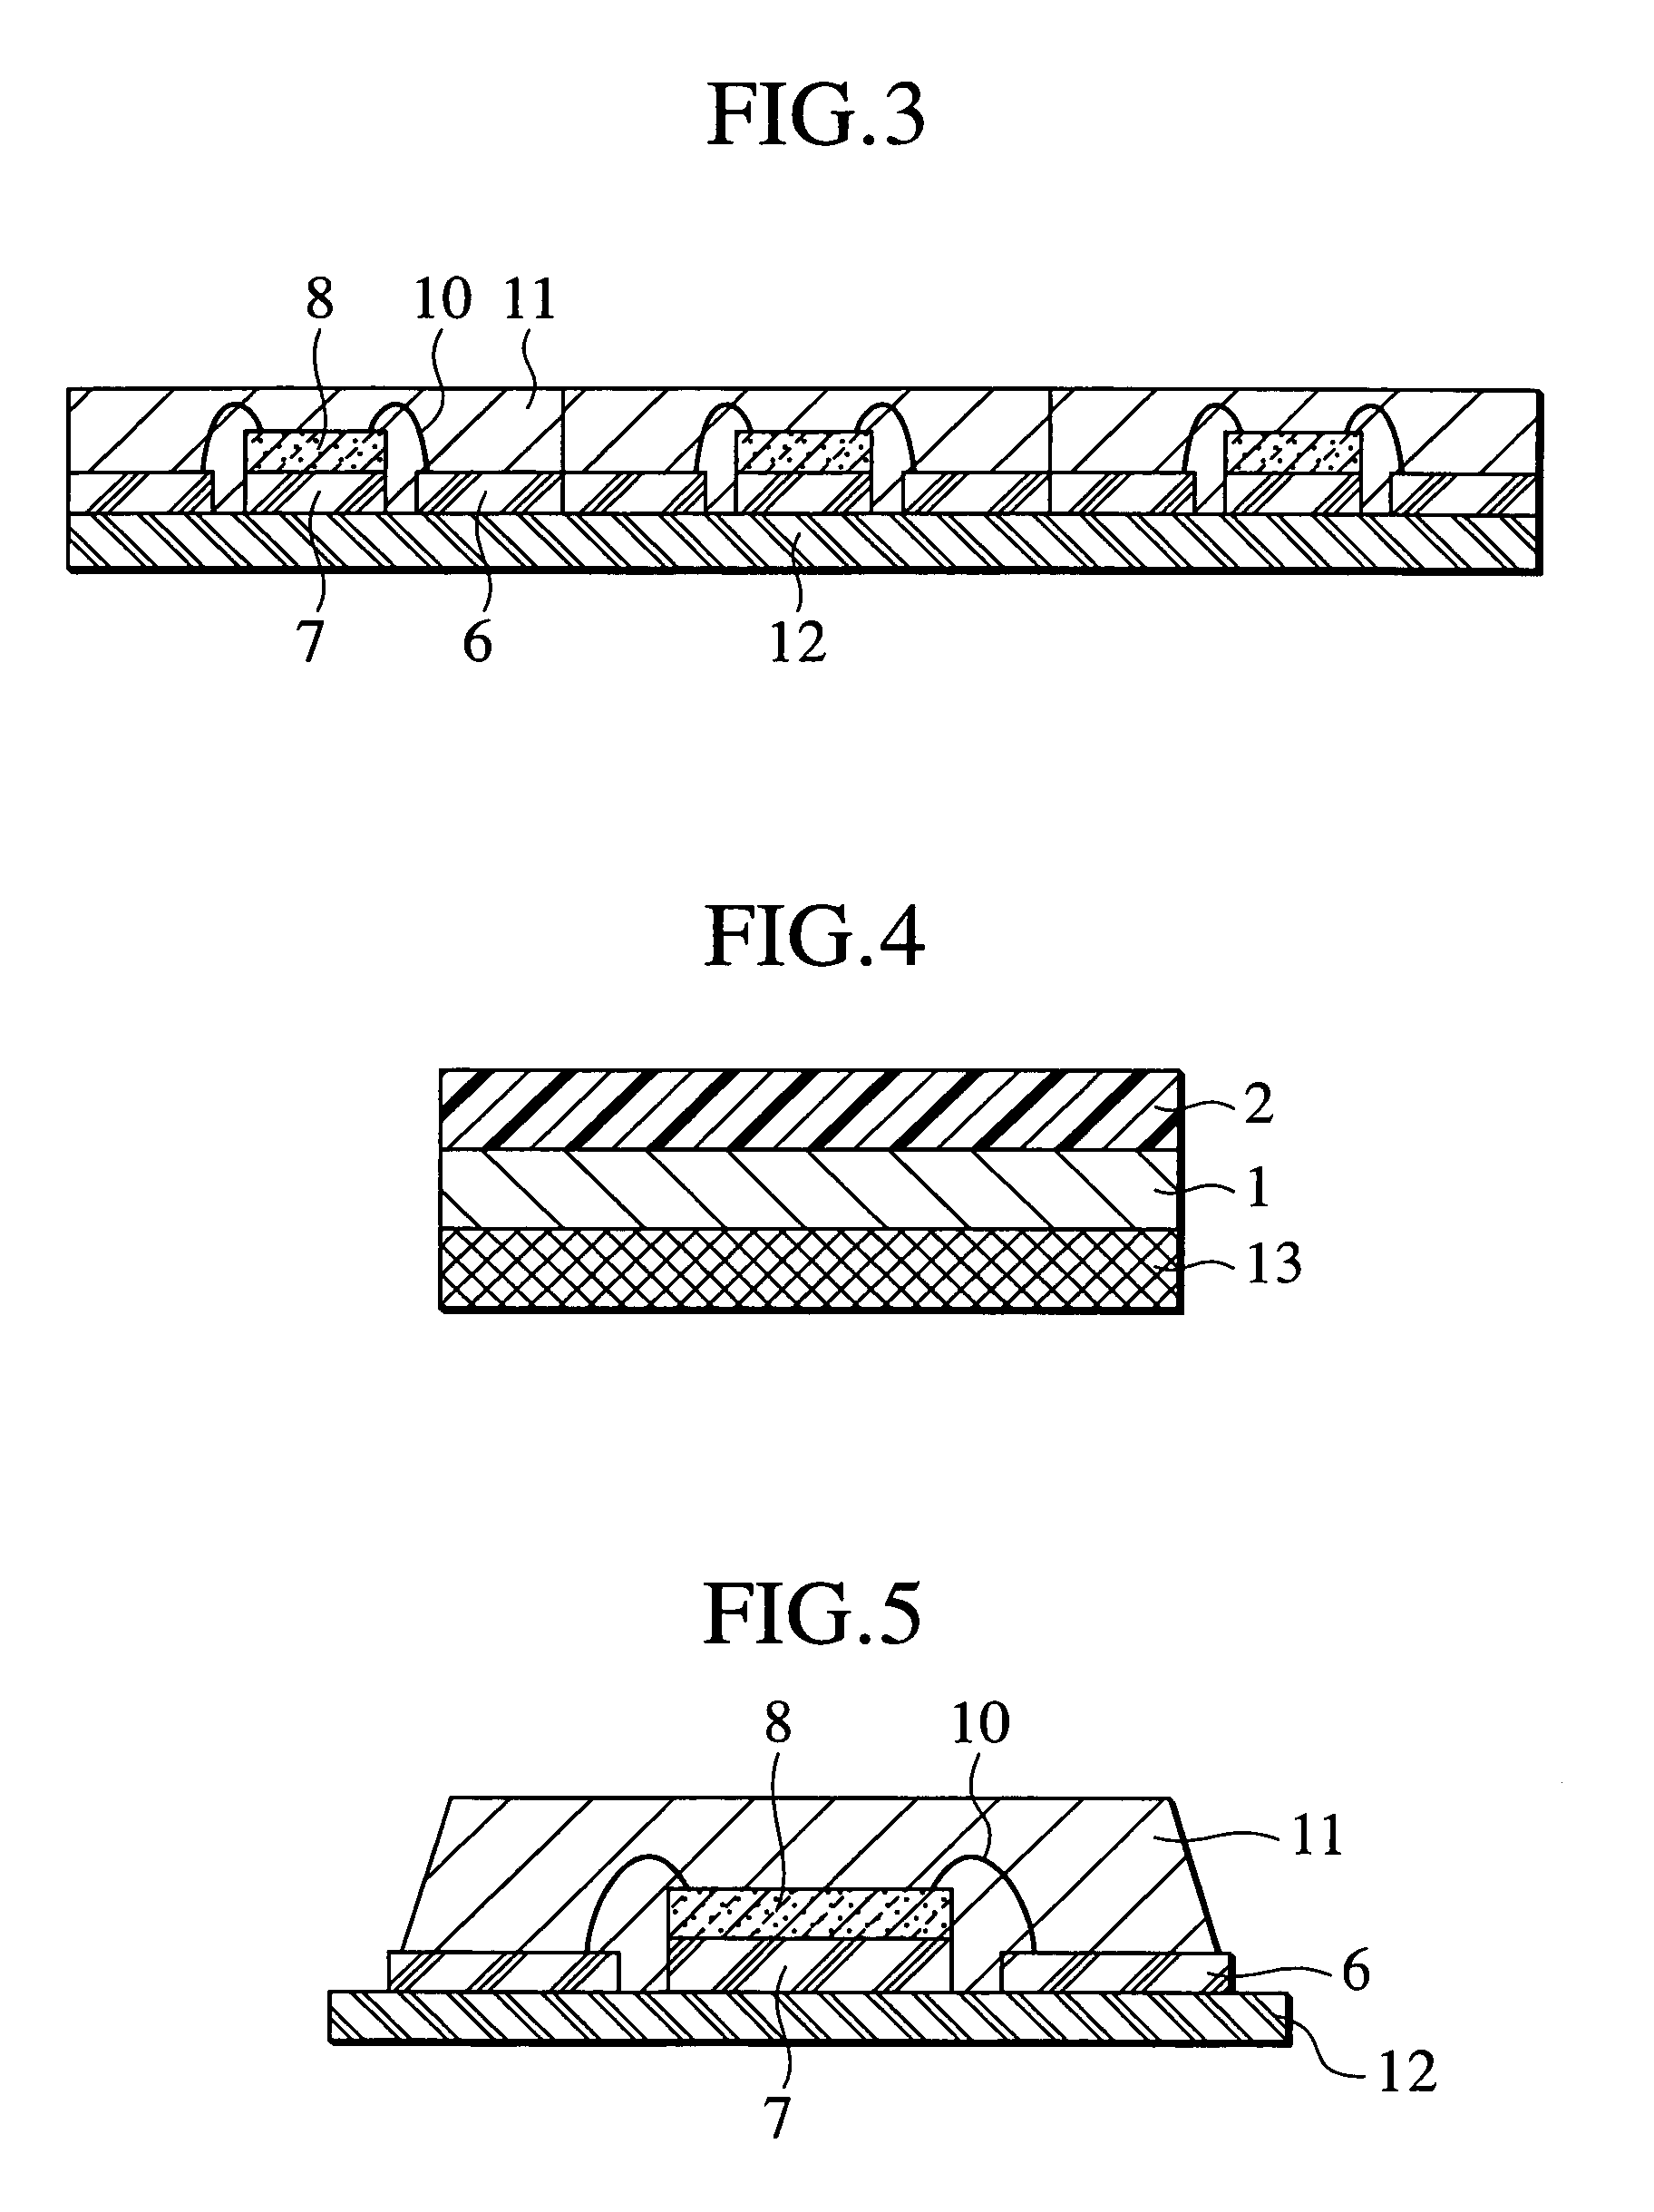 Adhesive film for semiconductor, metal sheet with such adhesive film, wiring substrate with adhesive film, semiconductor device, and method for manufacturing semiconductor device